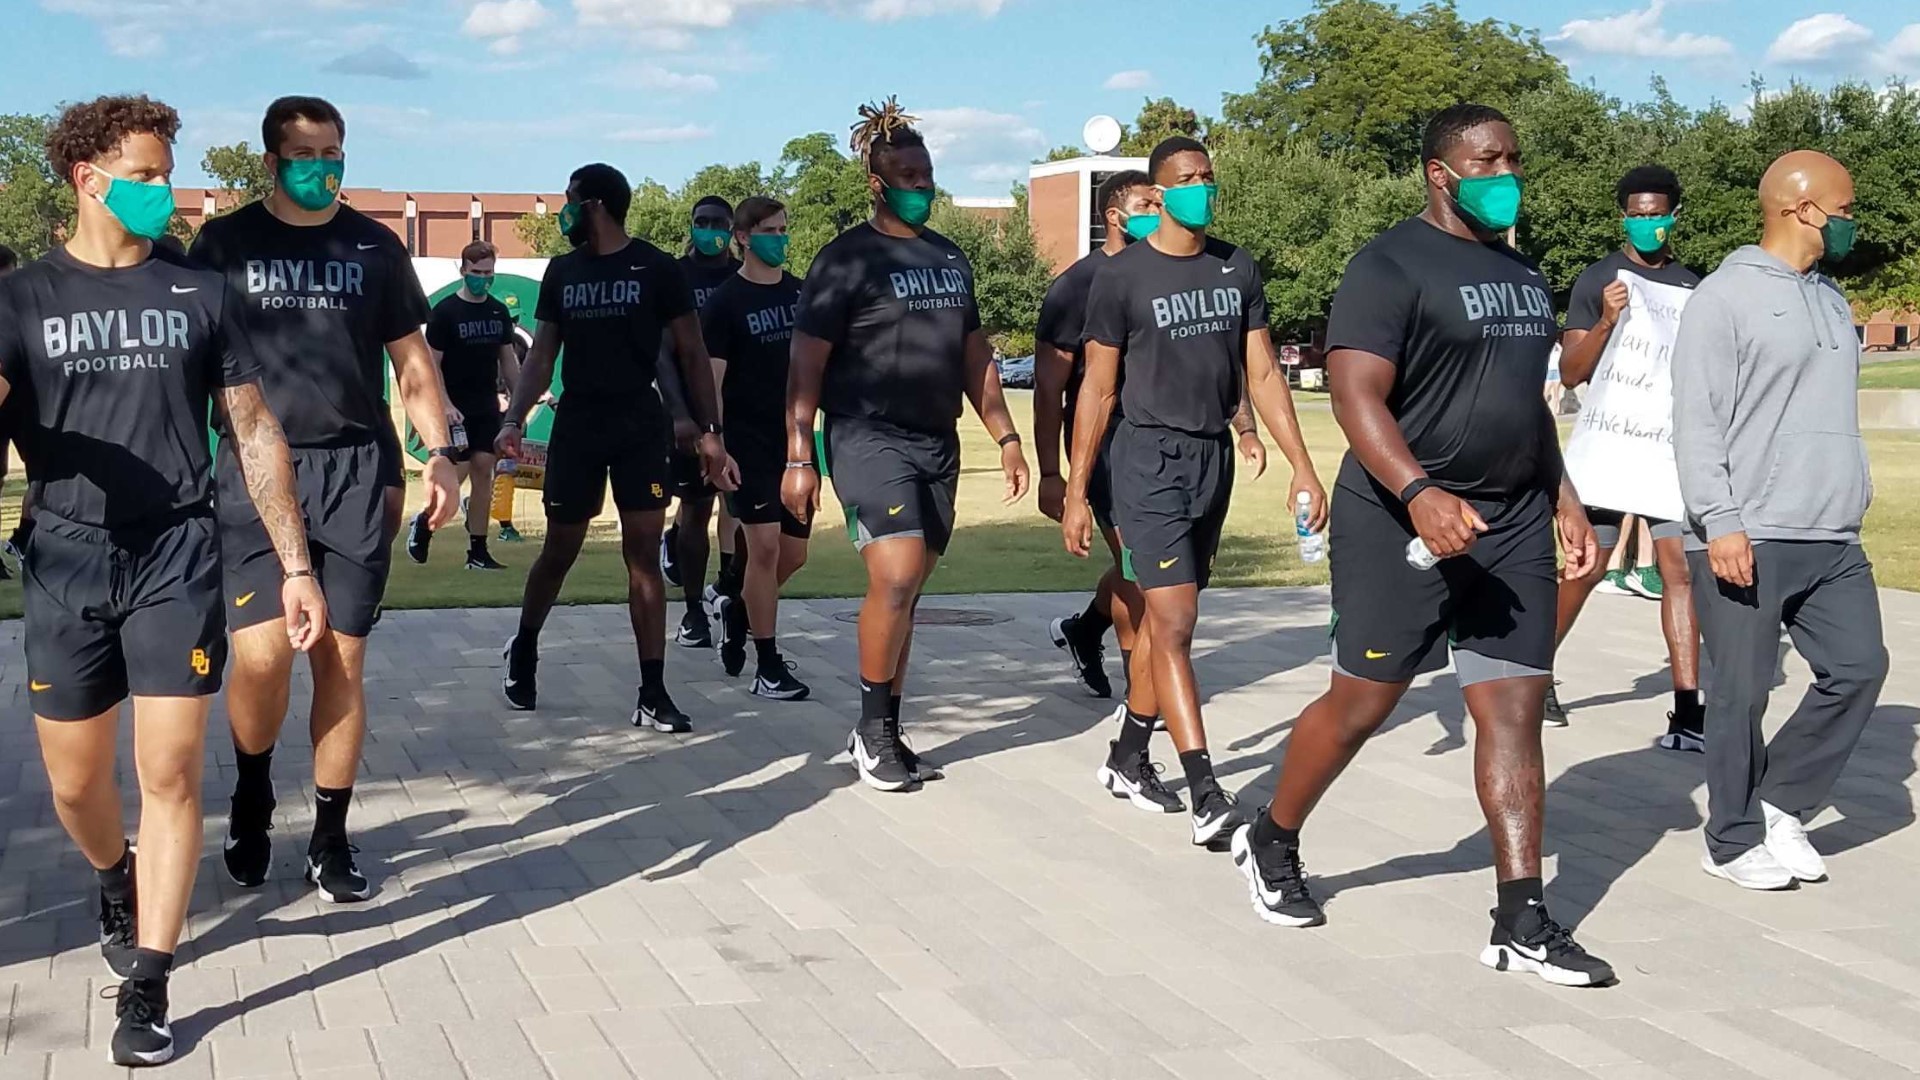 Baylor football players marched across campus Thursday in protest of the shooting of Jacob Blake.